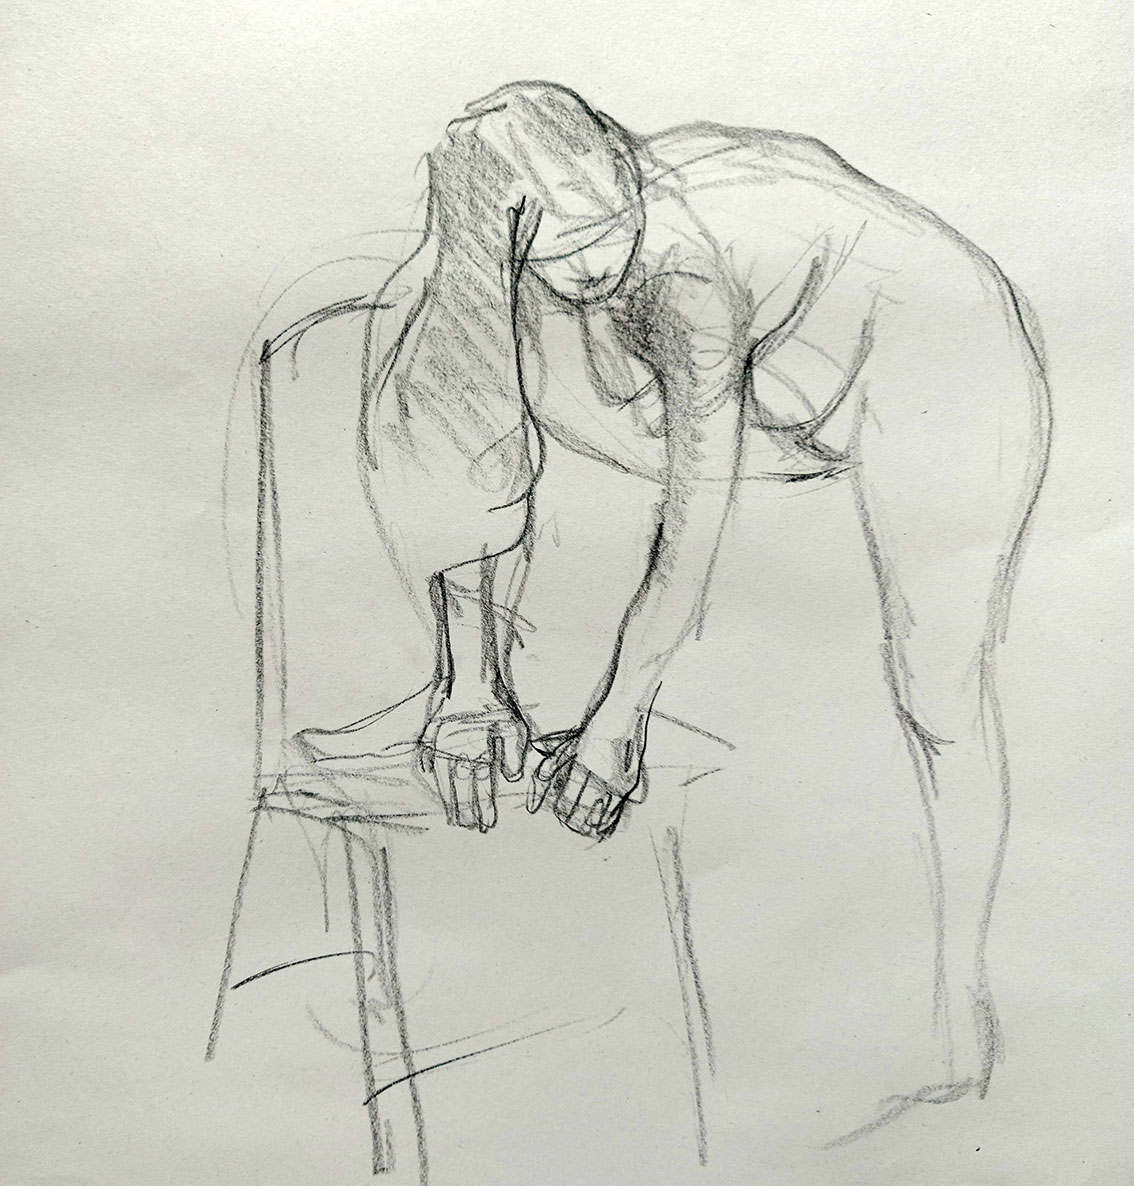 Zoe. 4-minute pose in charcoal. A2